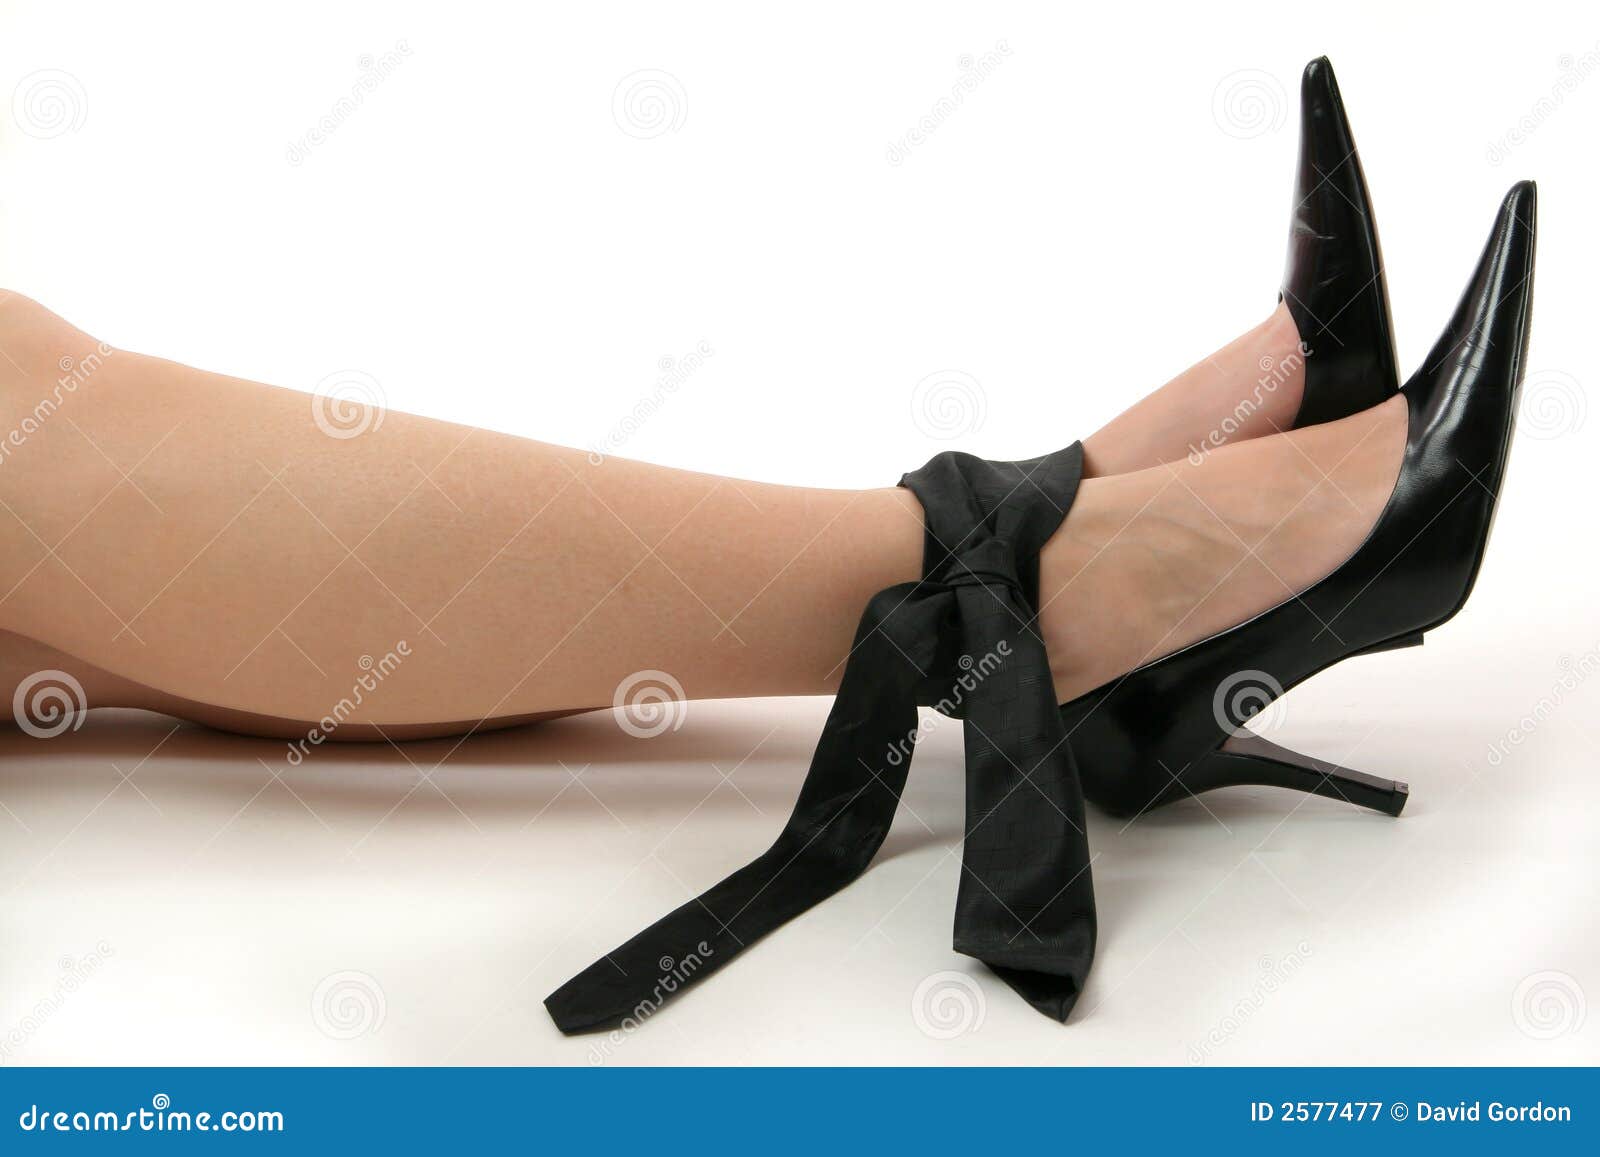 danielle herman recommends women tied up in high heels pic